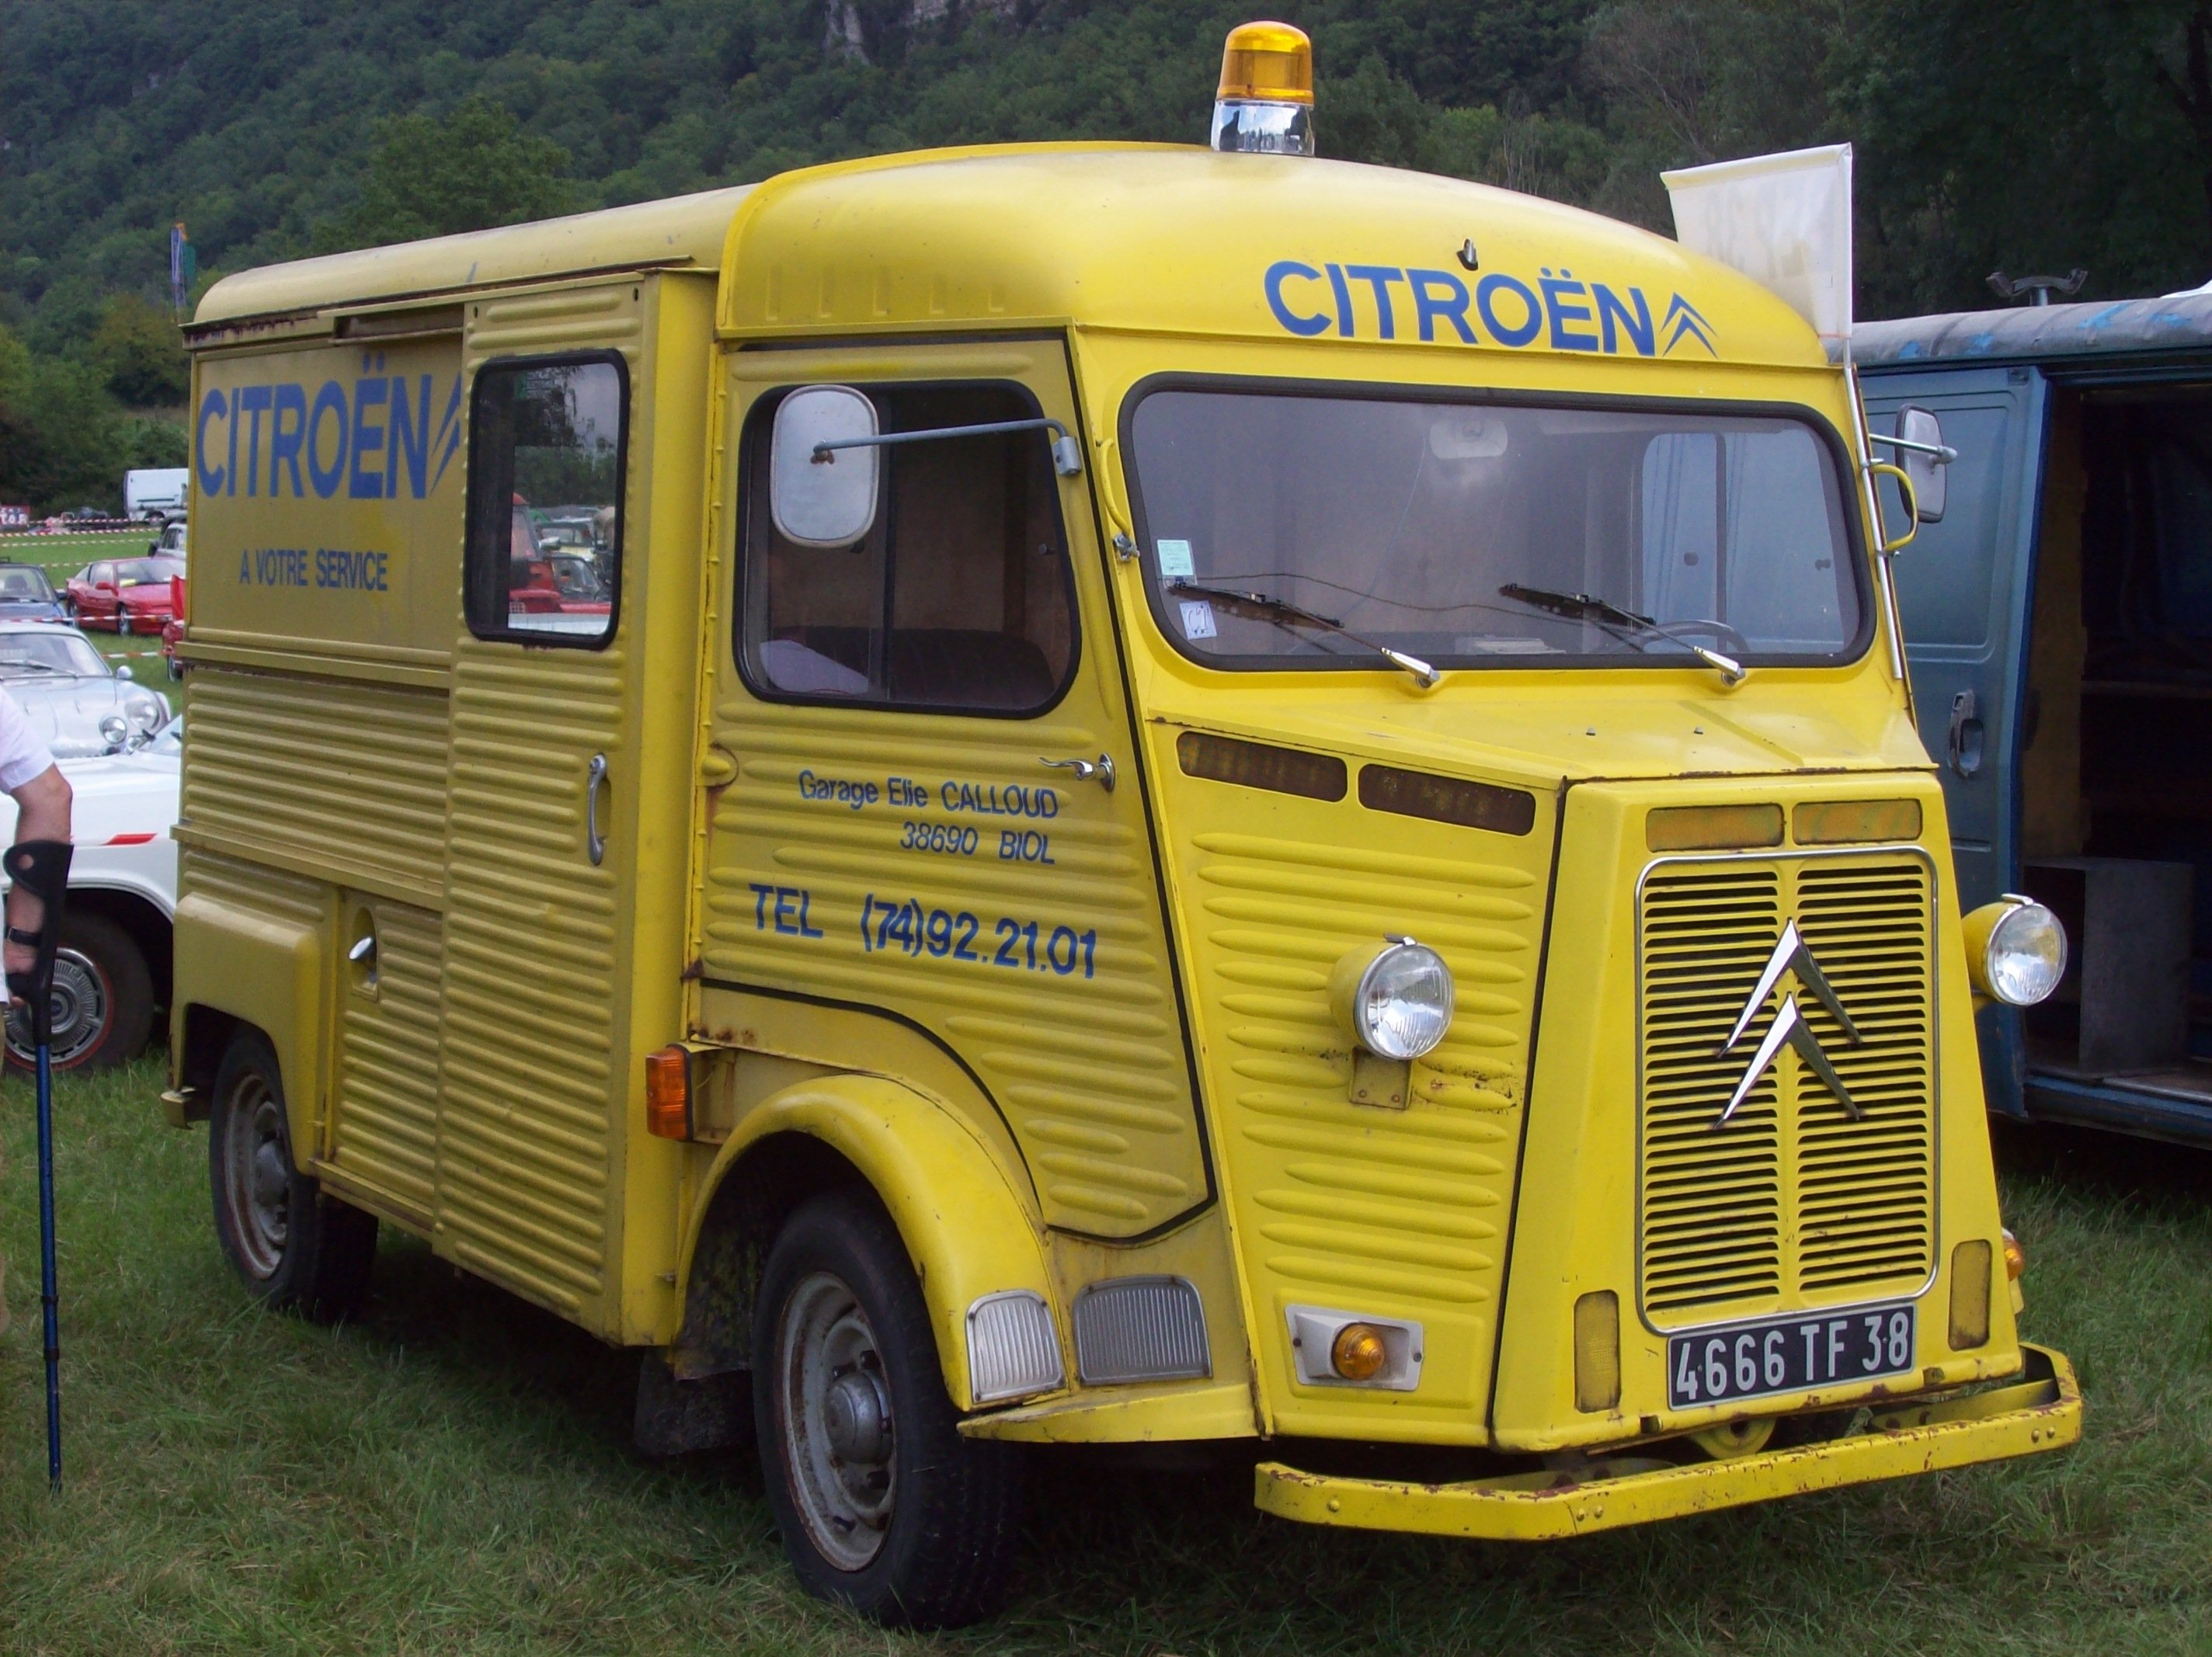 citroen, Type h, Classic, Cars, French, Fourgonnette, Truck, Van, Food, Delivery Wallpaper